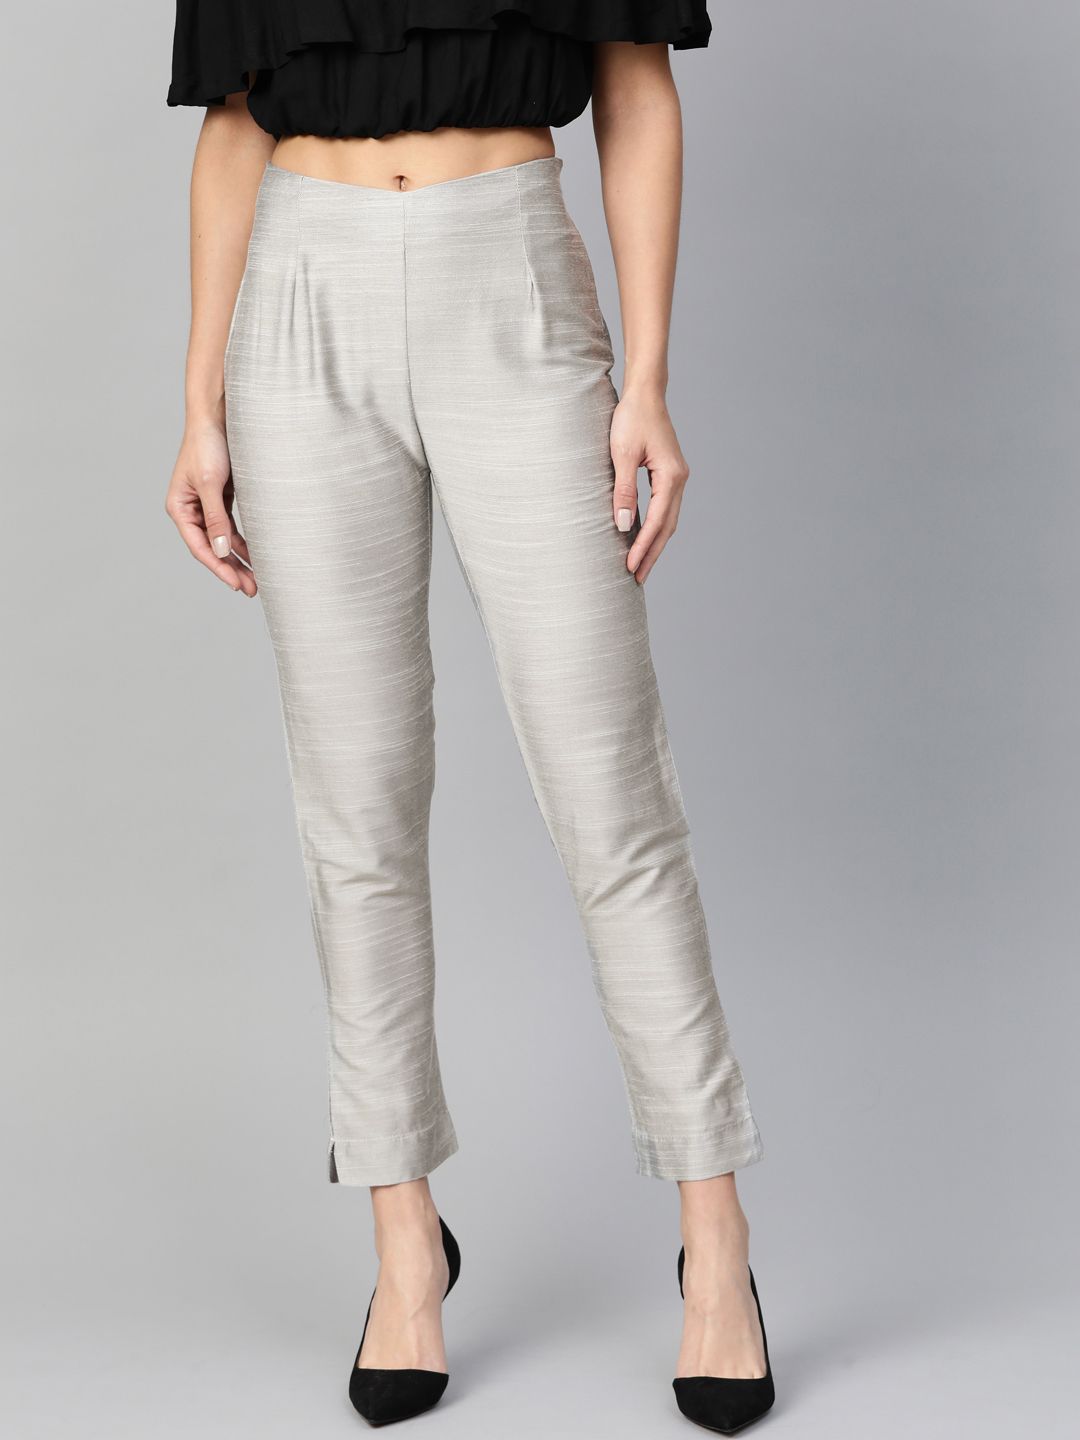 W Women Grey Slim Fit Solid Cropped Trousers Price in India